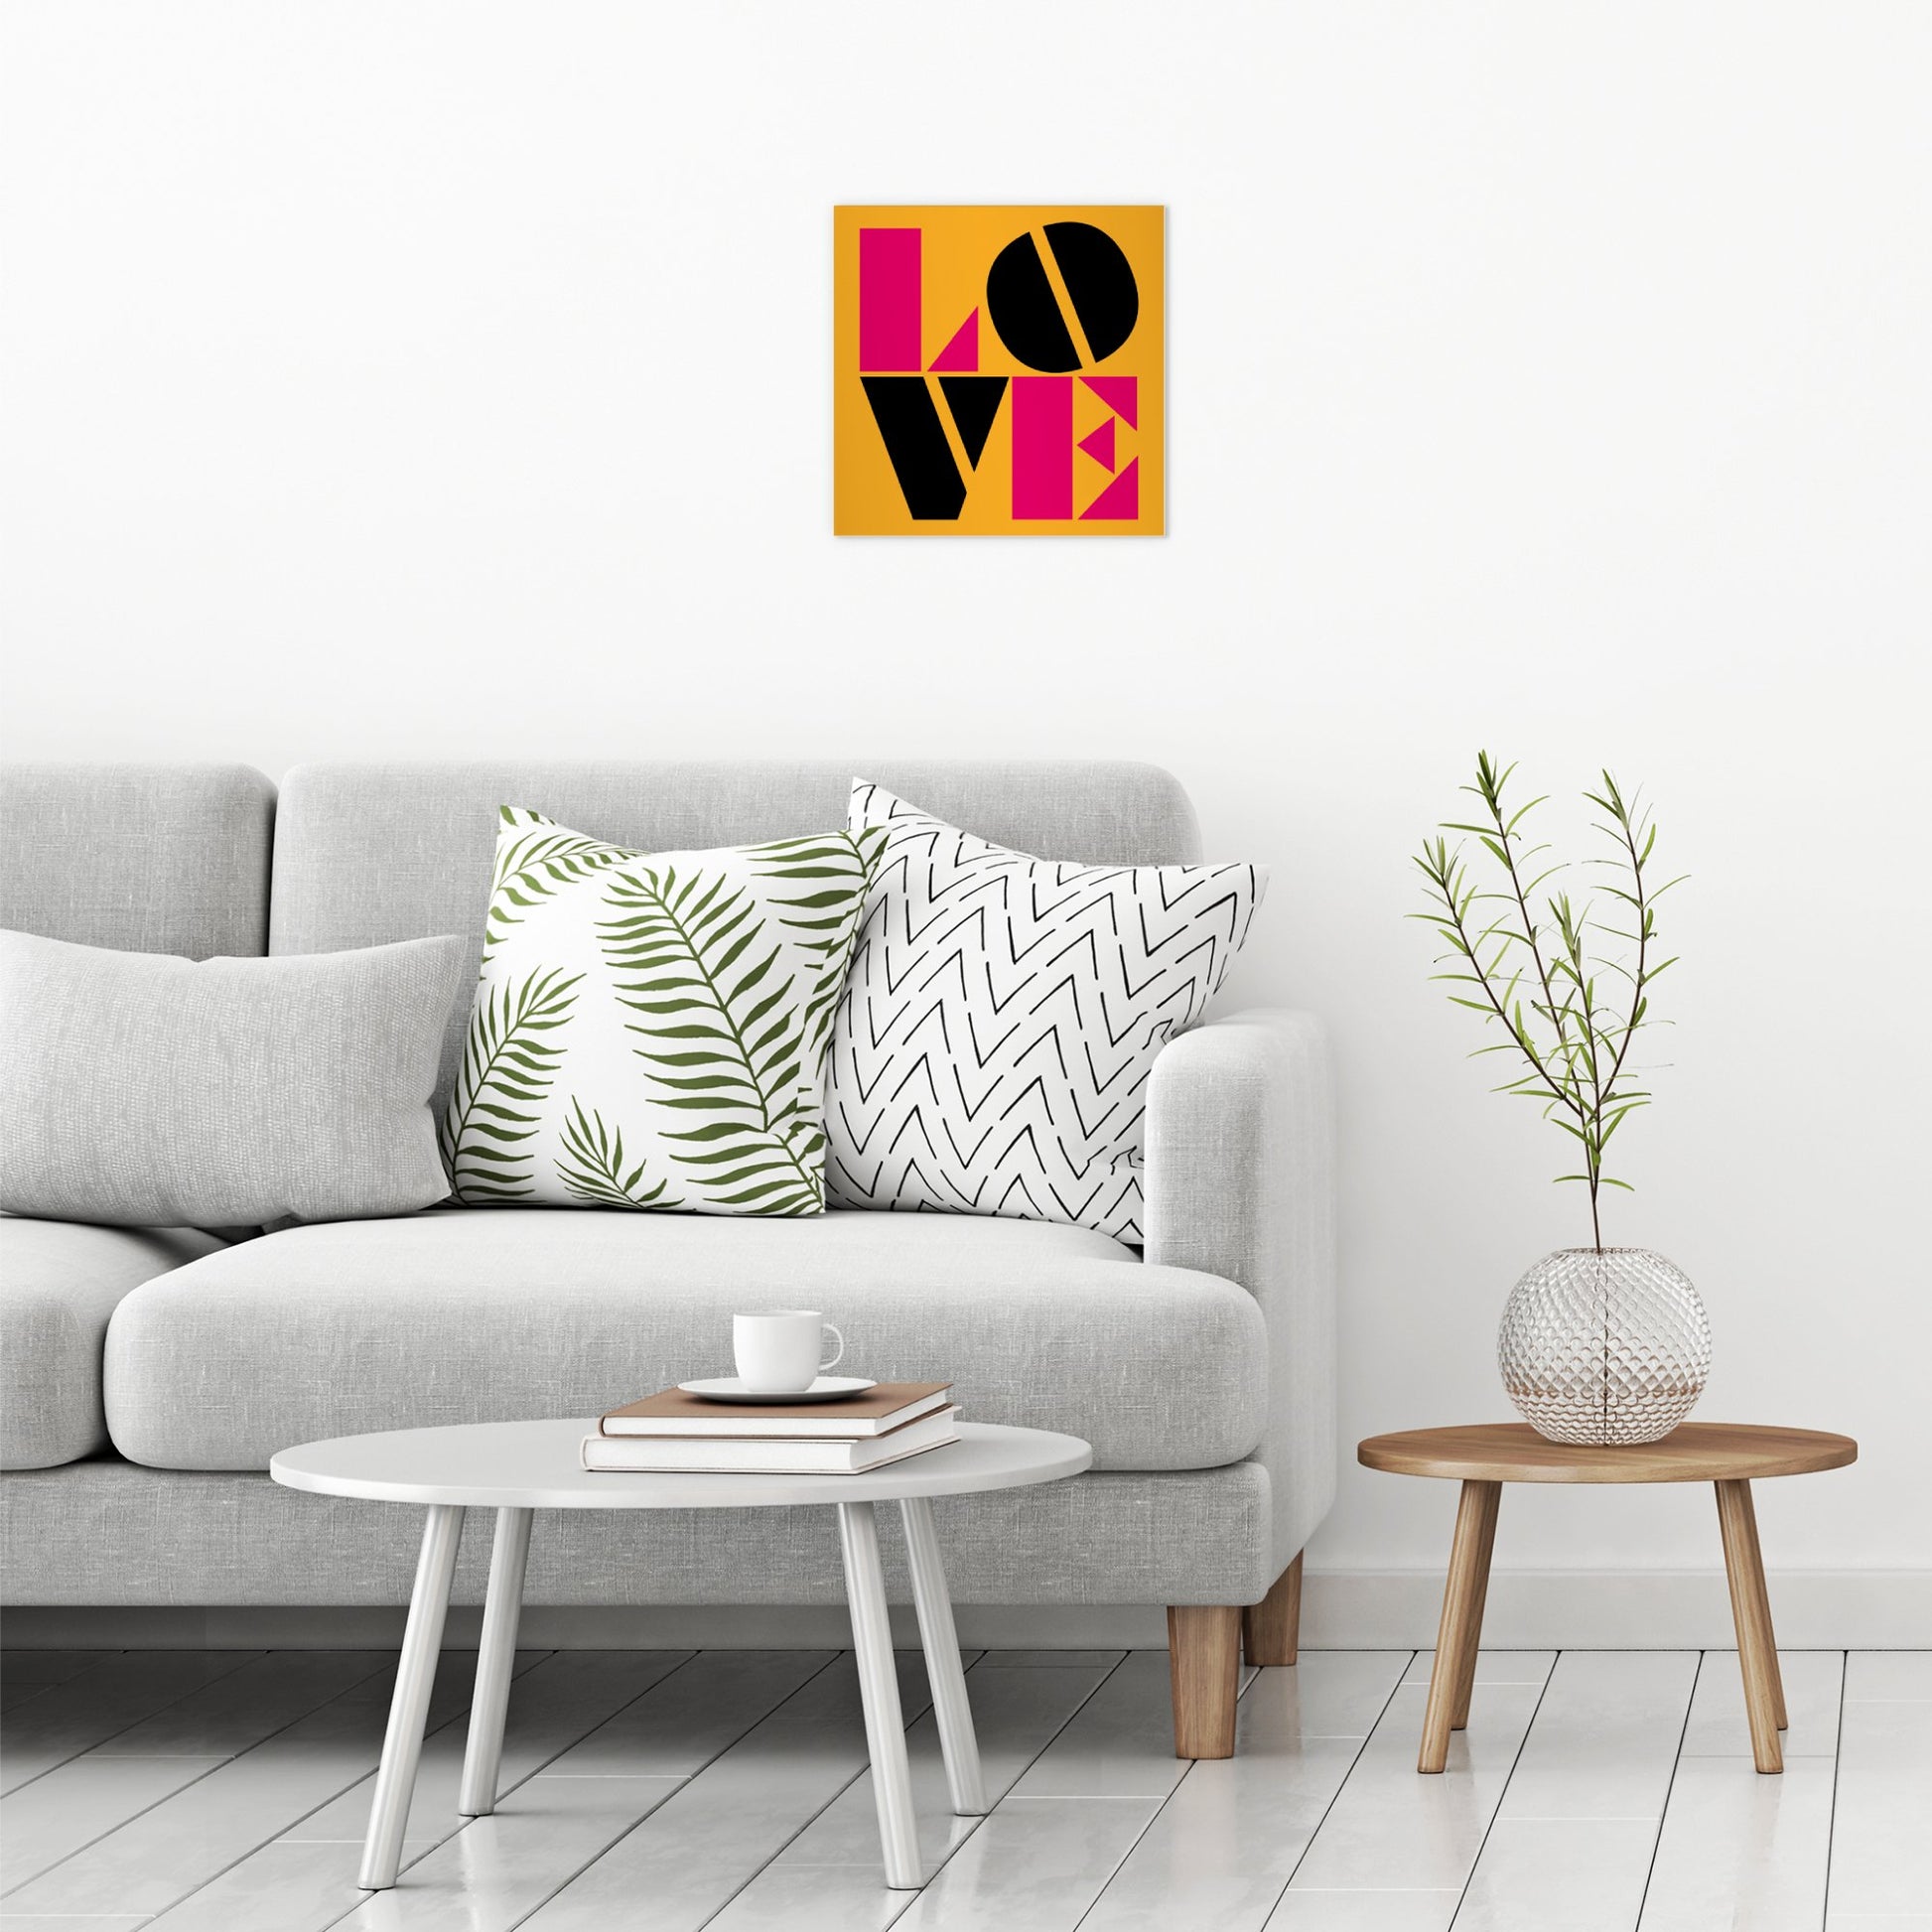 A contemporary modern room view showing a medium size metal art poster display plate with printed design of a Typographic Love Design